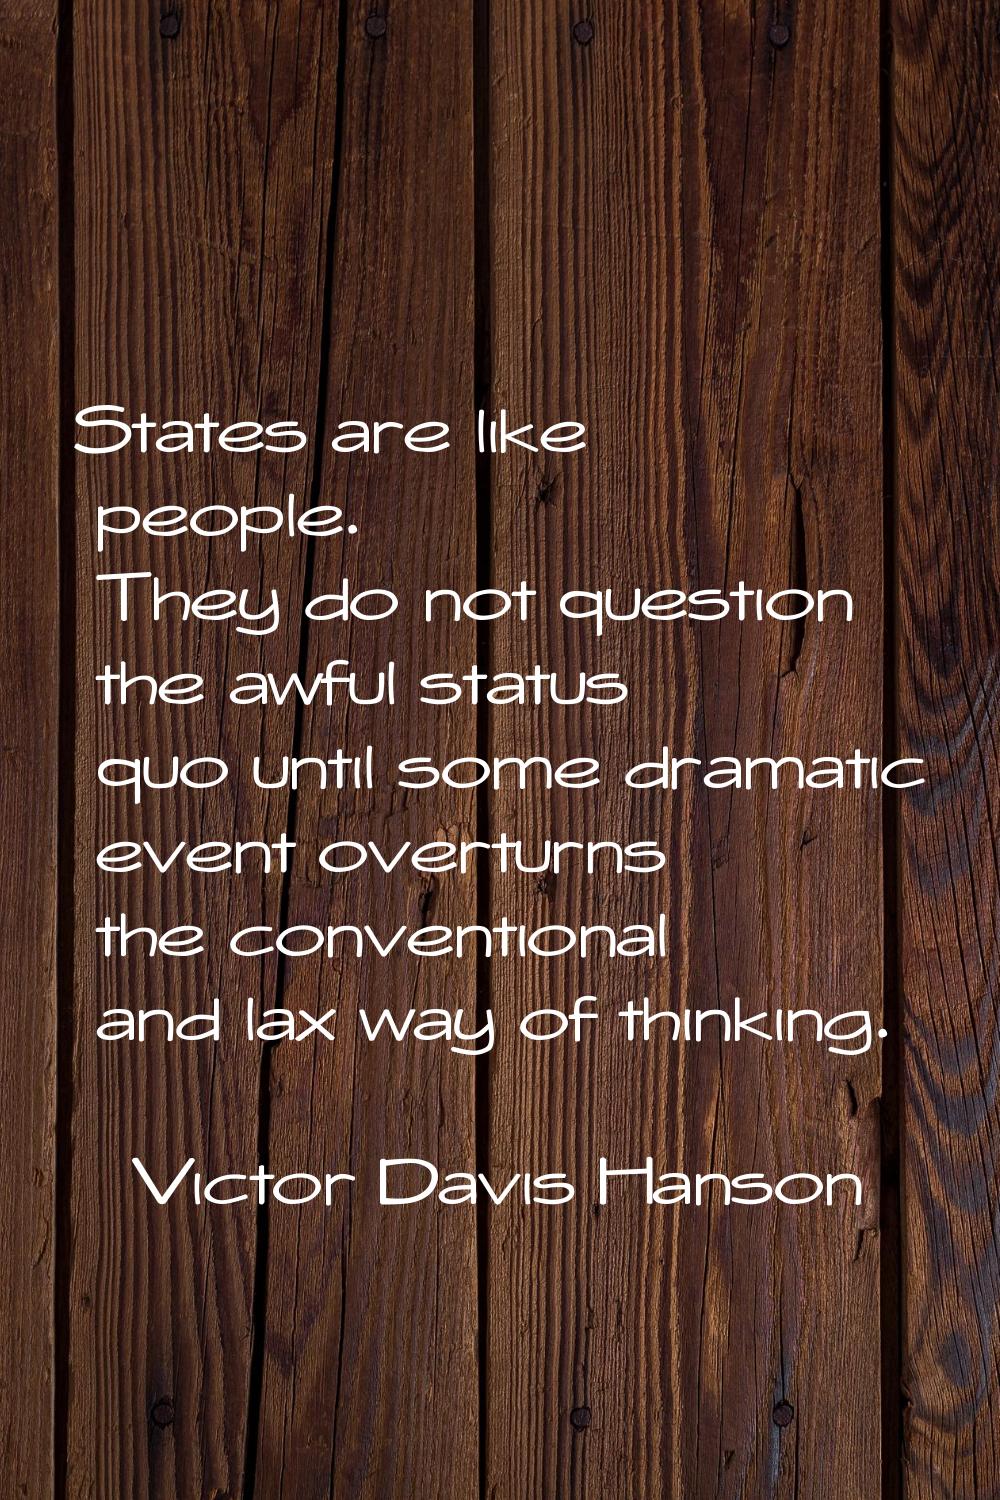 States are like people. They do not question the awful status quo until some dramatic event overtur